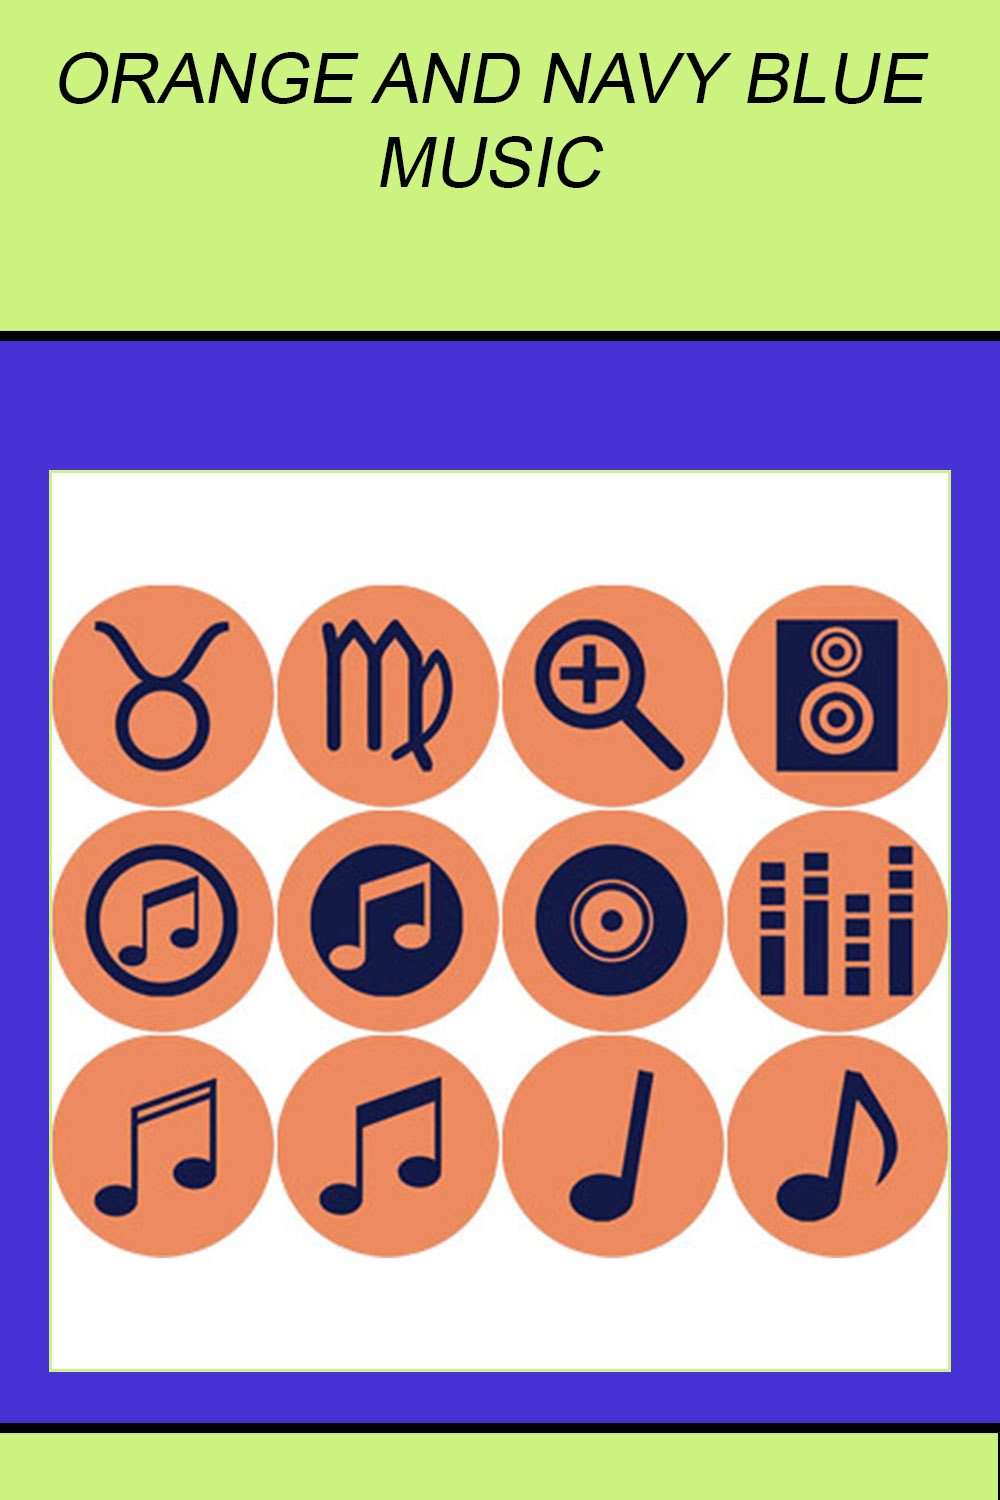 ORANGE AND NAVY BLUE MUSIC ROUND ICONS pinterest preview image.